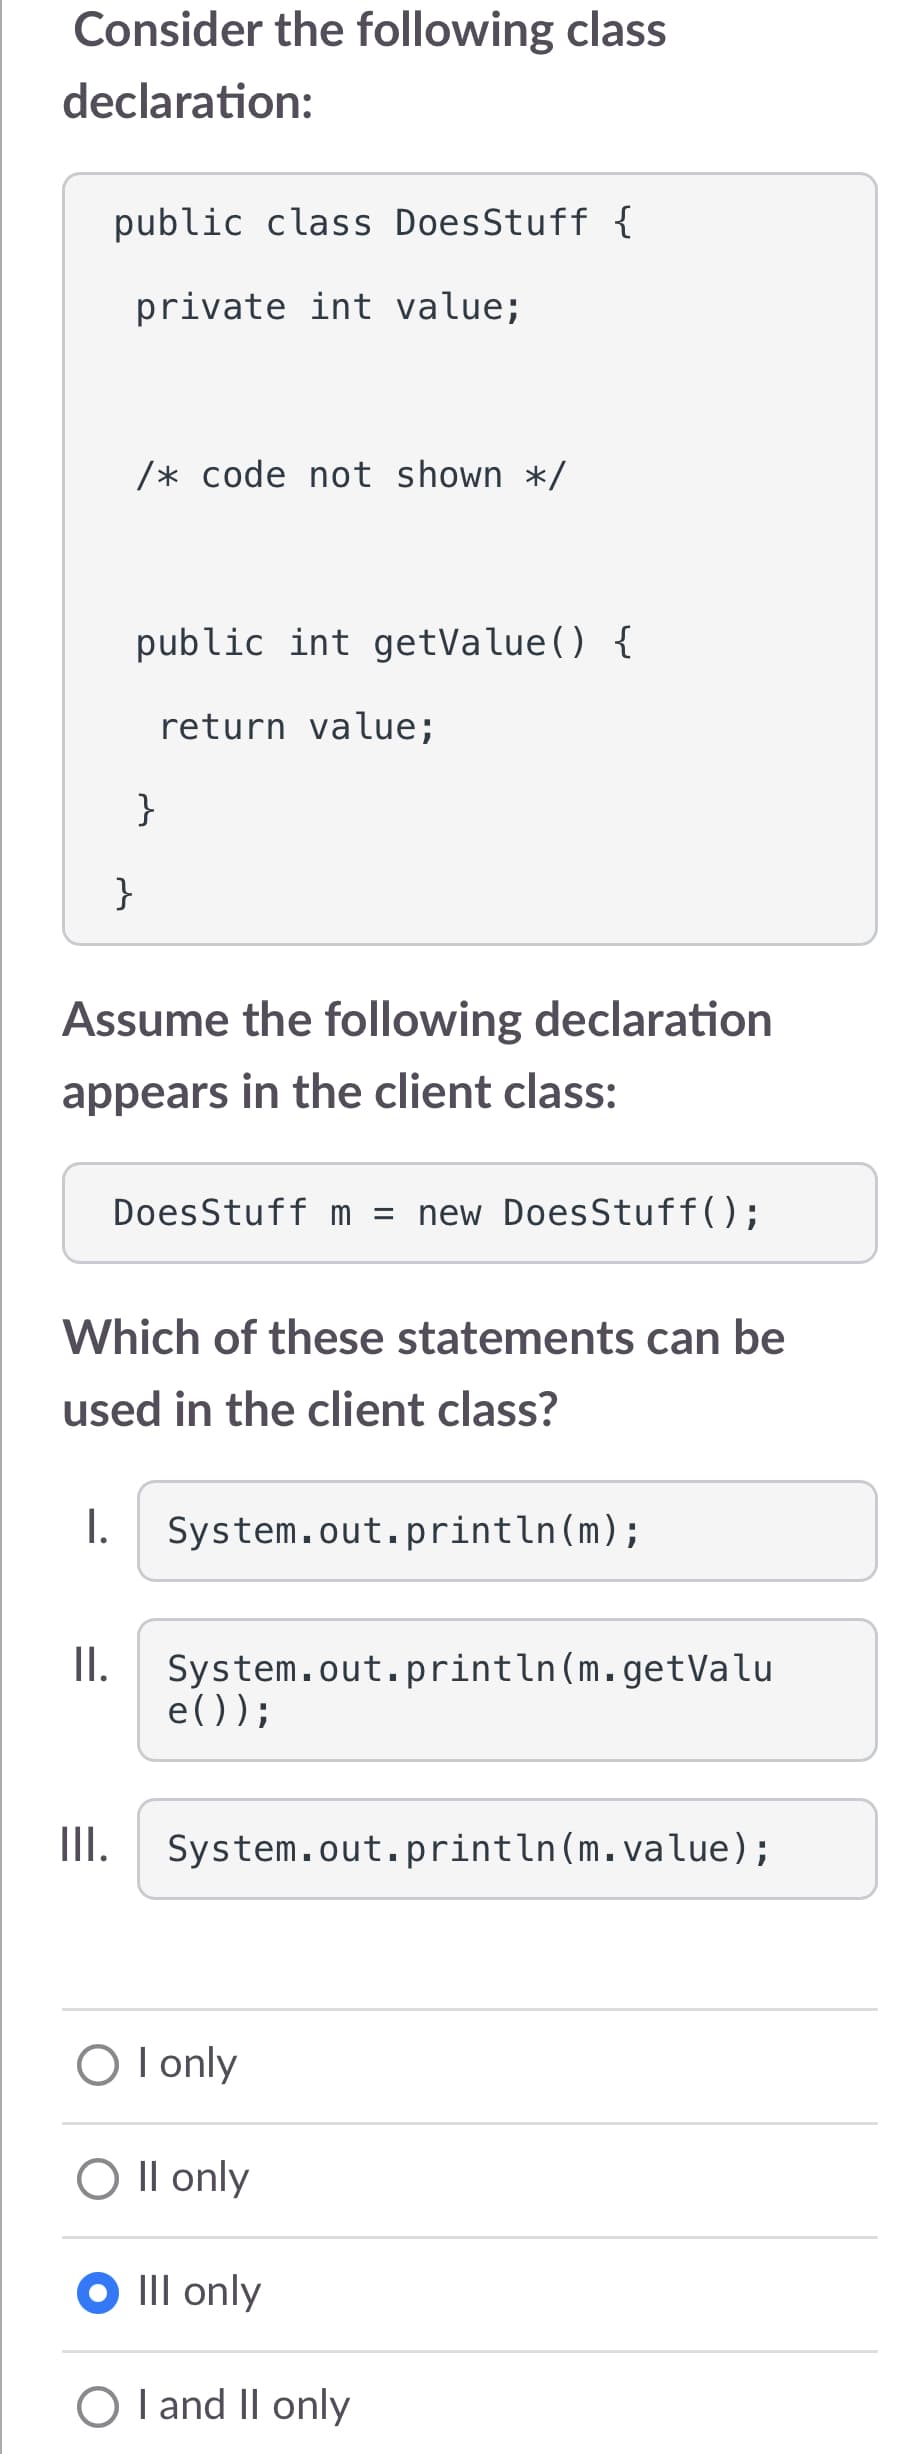 Consider the following class
declaration:
public class DoesStuff {
private int value;
II.
/* code not shown */
}
III.
public int getValue() {
return value;
}
Assume the following declaration
appears in the client class:
Which of these statements can be
used in the client class?
DoesStuff m = new DoesStuff();
I. System.out.println(m);
System.out.println(m.getValu
e());
System.out.println(m.value);
O I only
O II only
Ill only
O I and II only